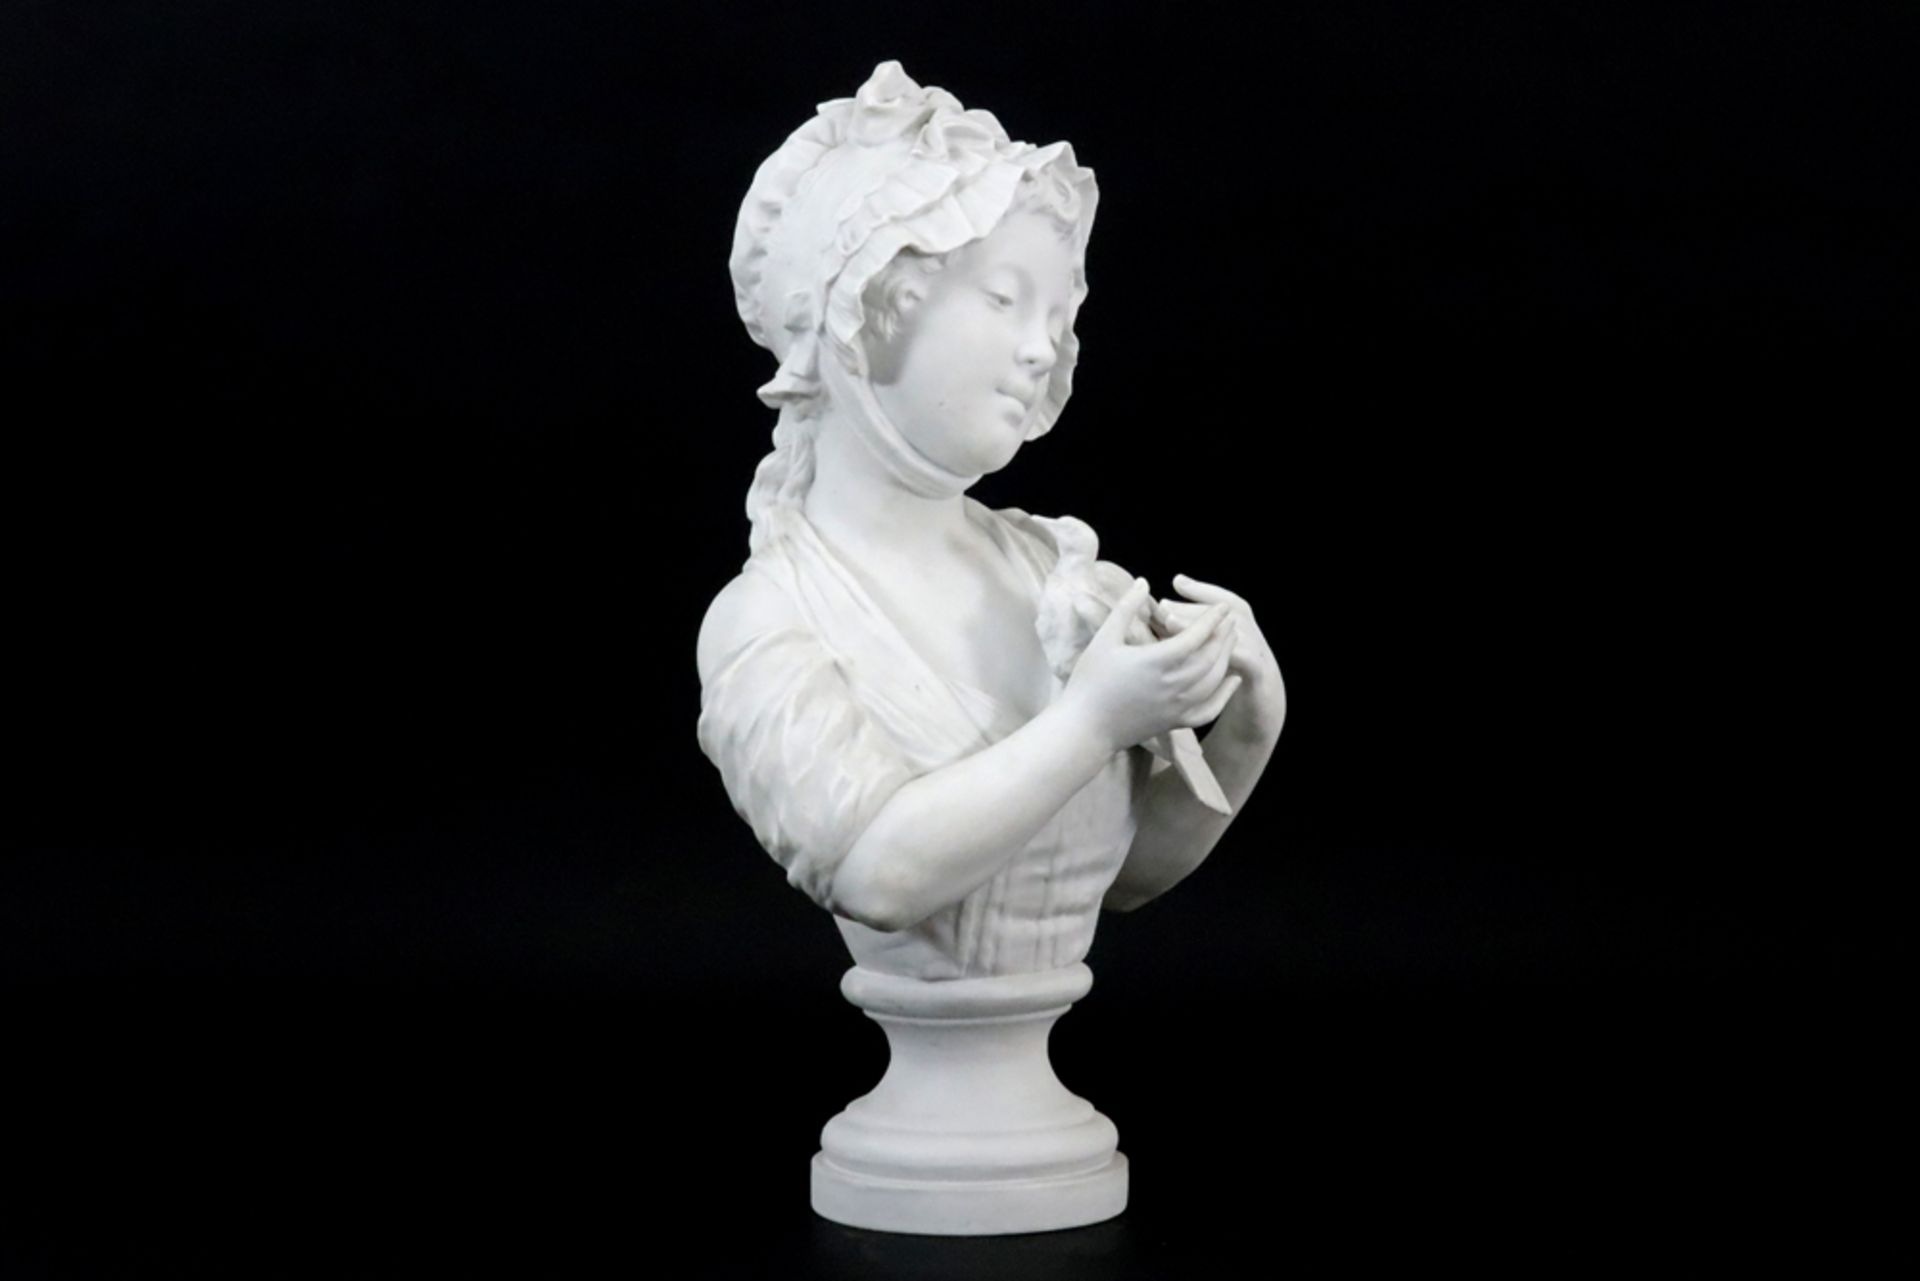 antique G. Levis signed neoclassical 'Girl's bust' sculpture in biscuit porcelain || LEVIS G. - Image 2 of 5